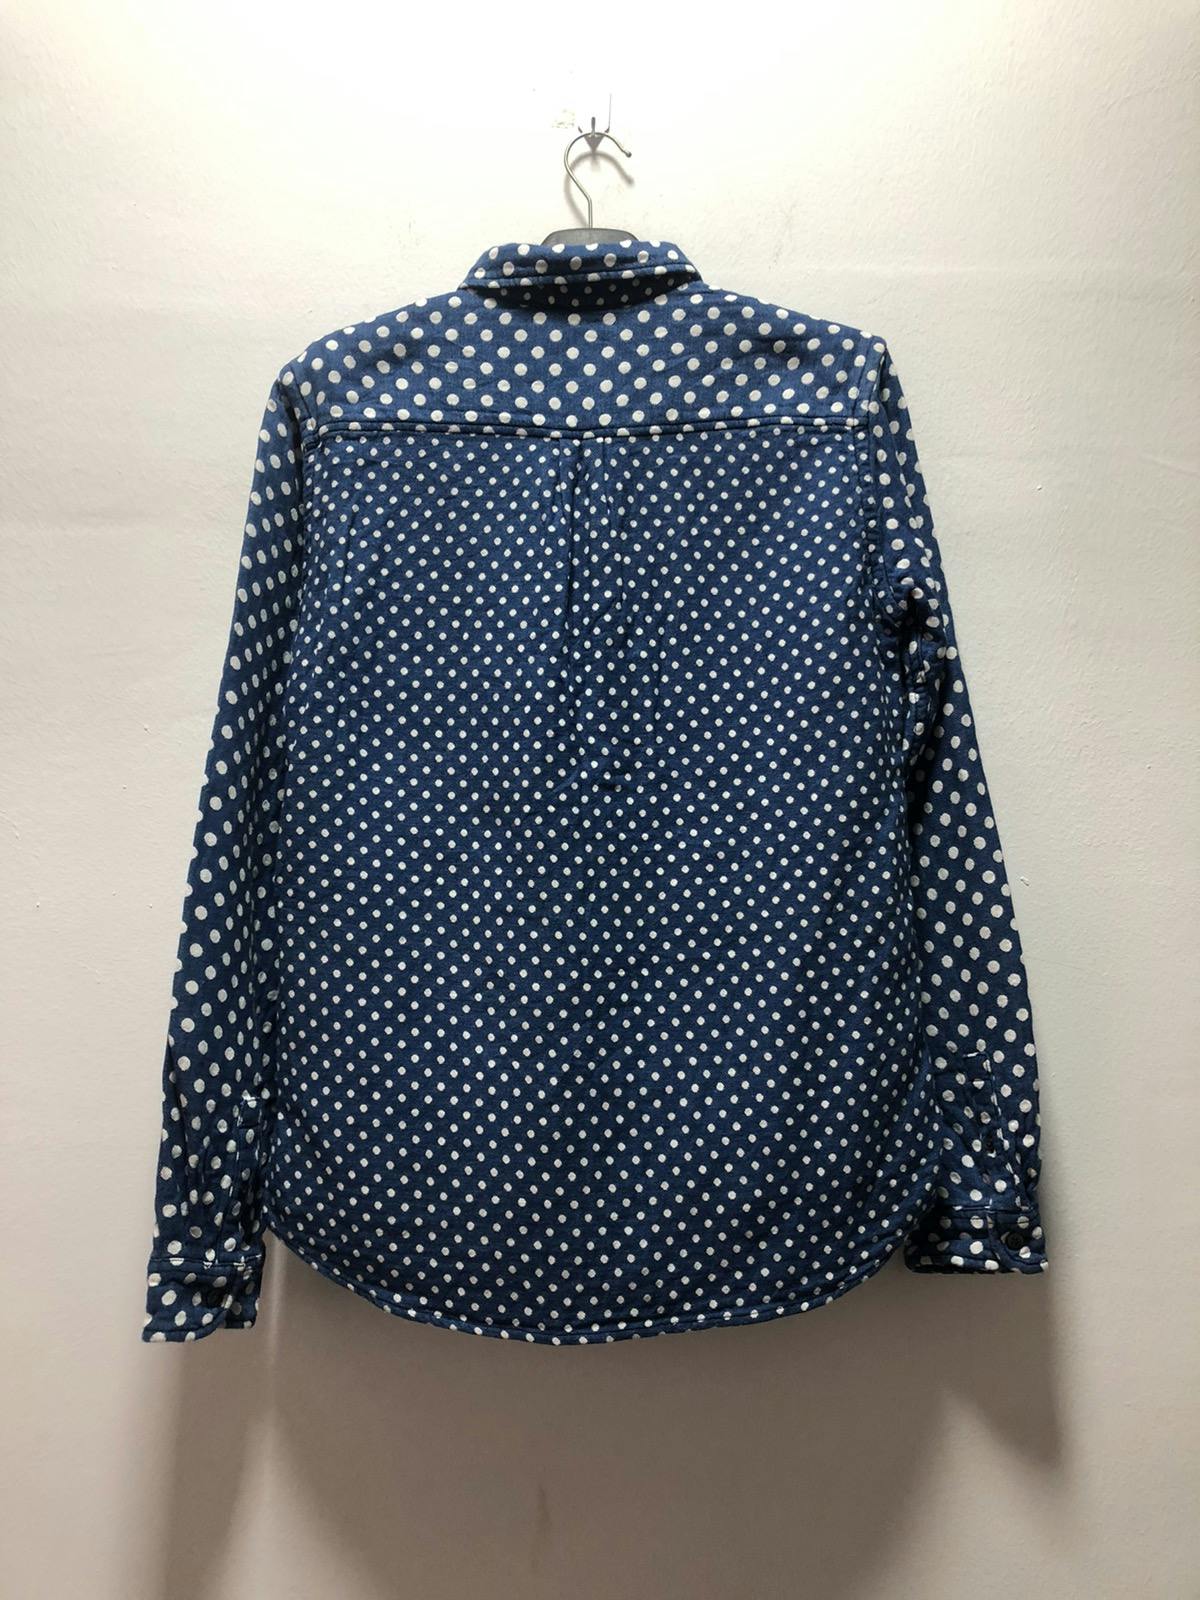 R NEWBOLD Shirt Flannel Japan Polka Dot Old And New - 6